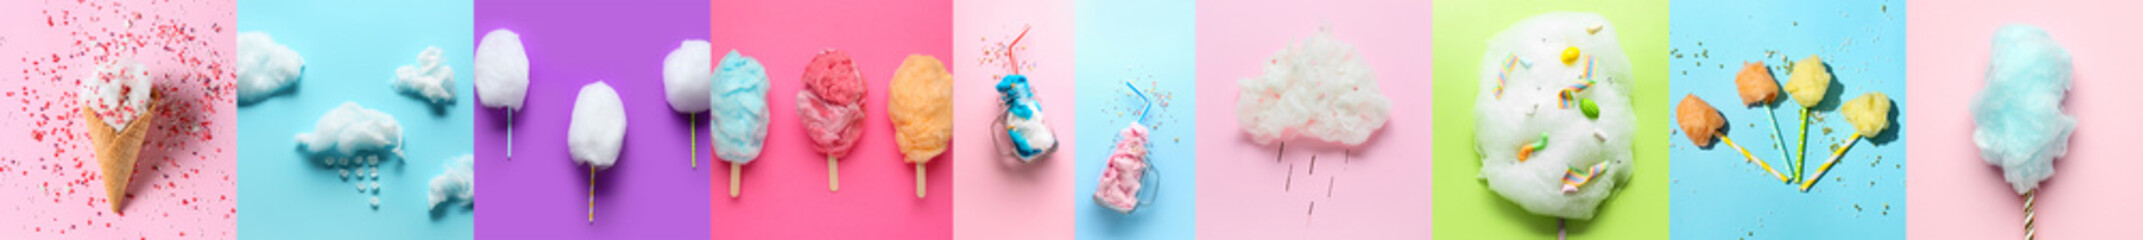 Collage of sweet cotton candy with sprinkles on color background, top view